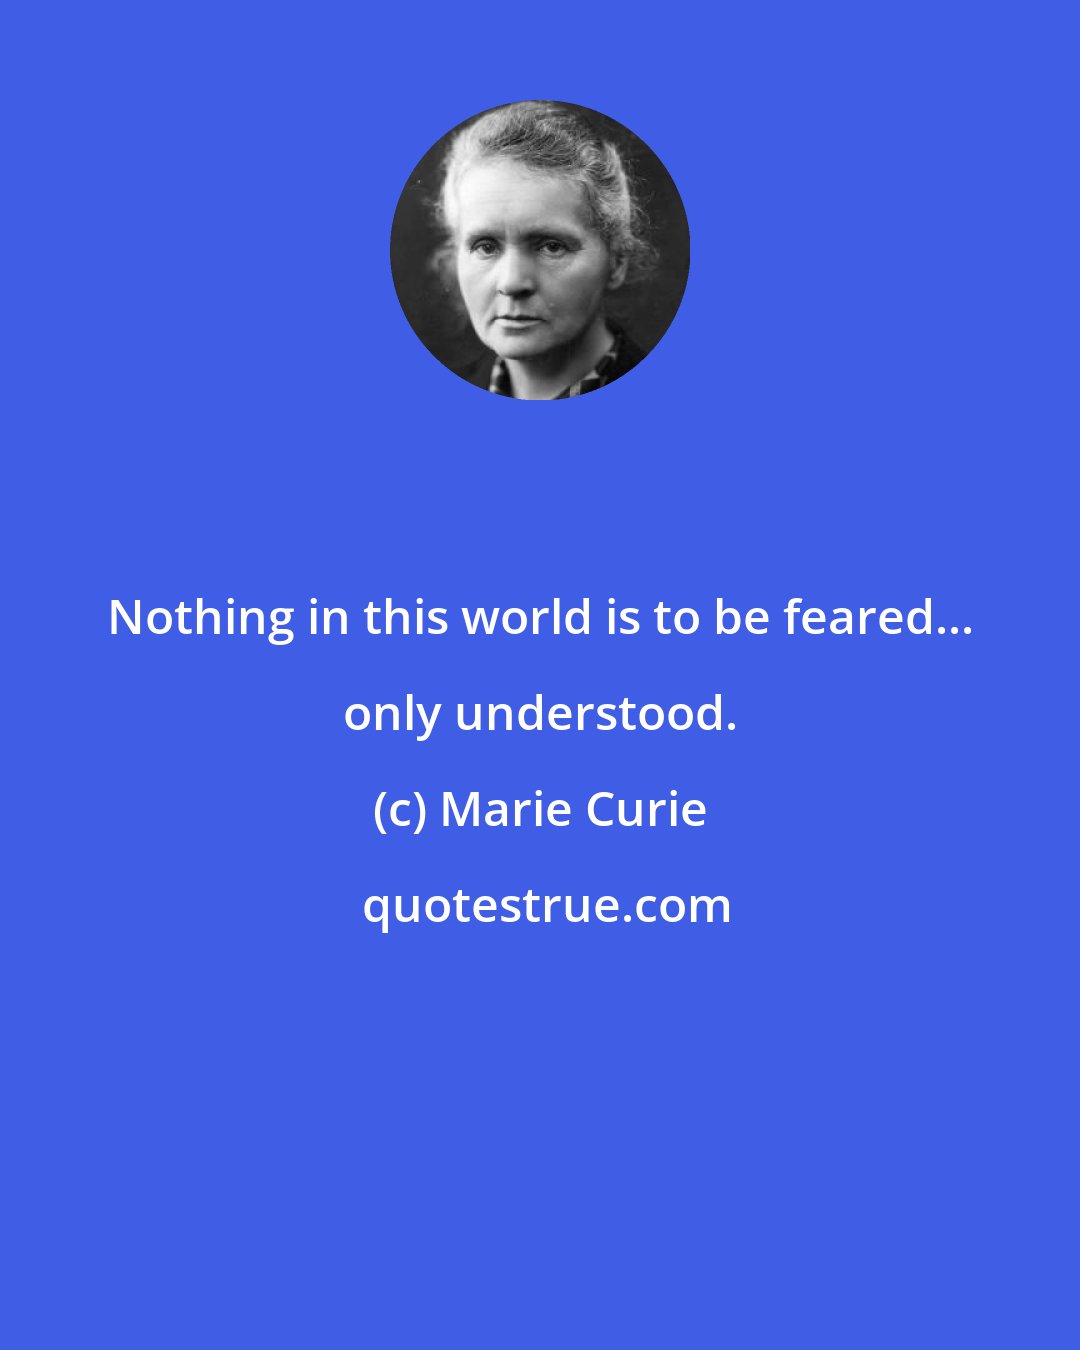 Marie Curie: Nothing in this world is to be feared... only understood.